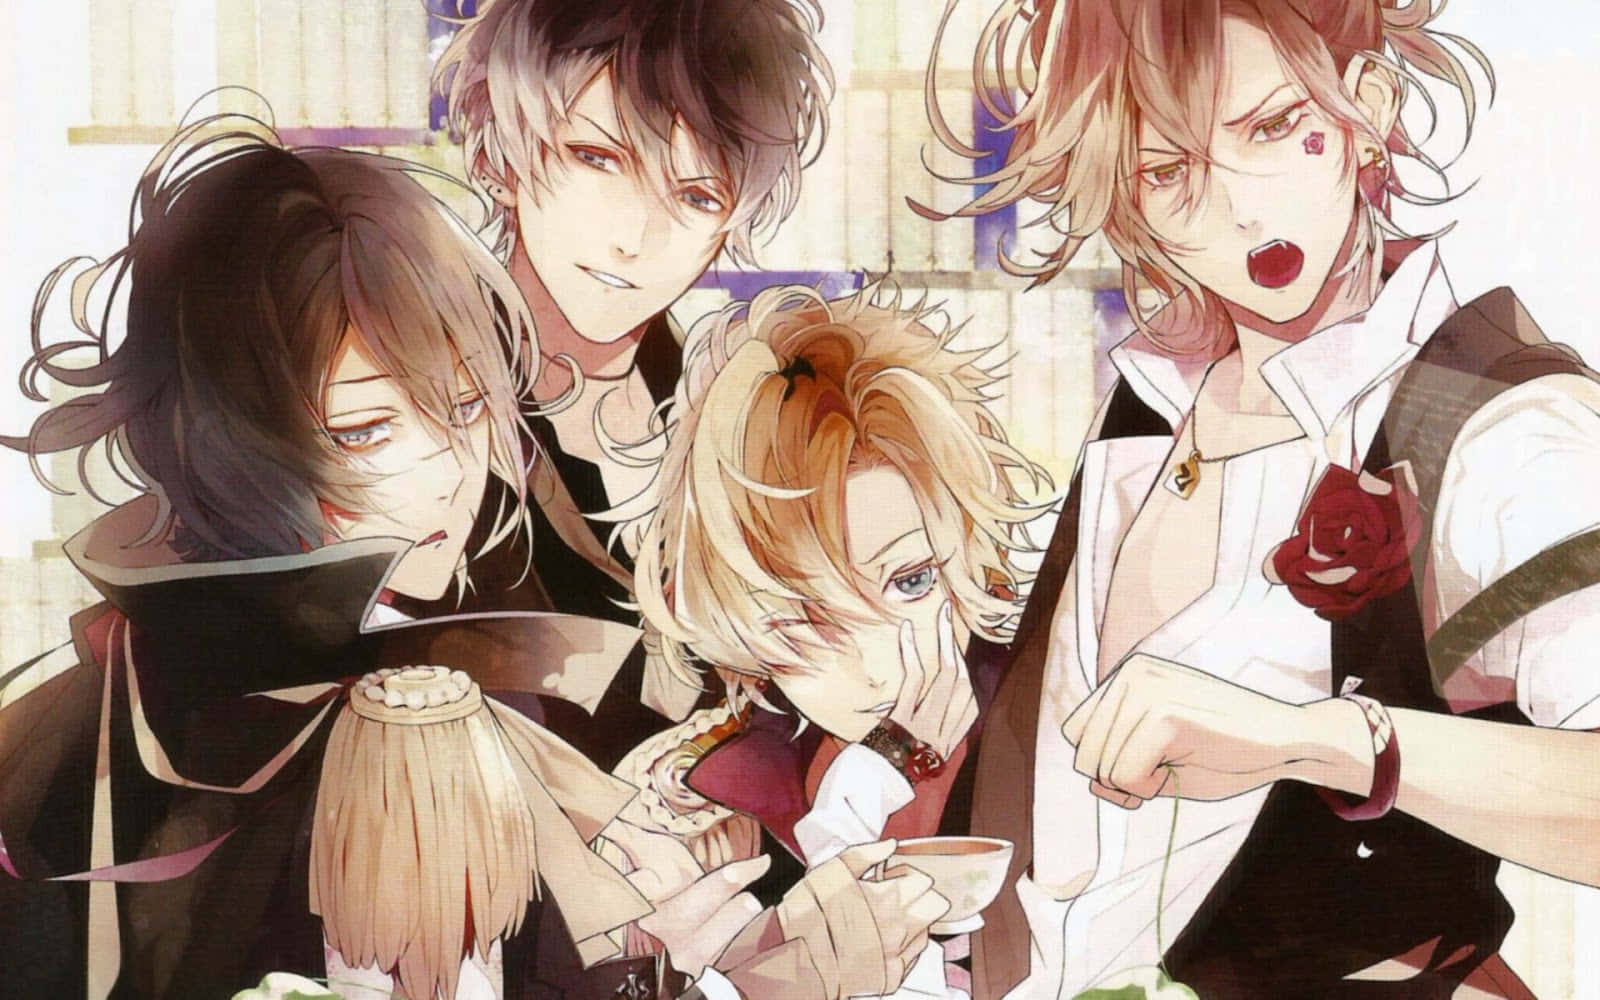 Vampire brothers, Yui Komori, and a journey of supernatural discovery in Diabolik Lovers